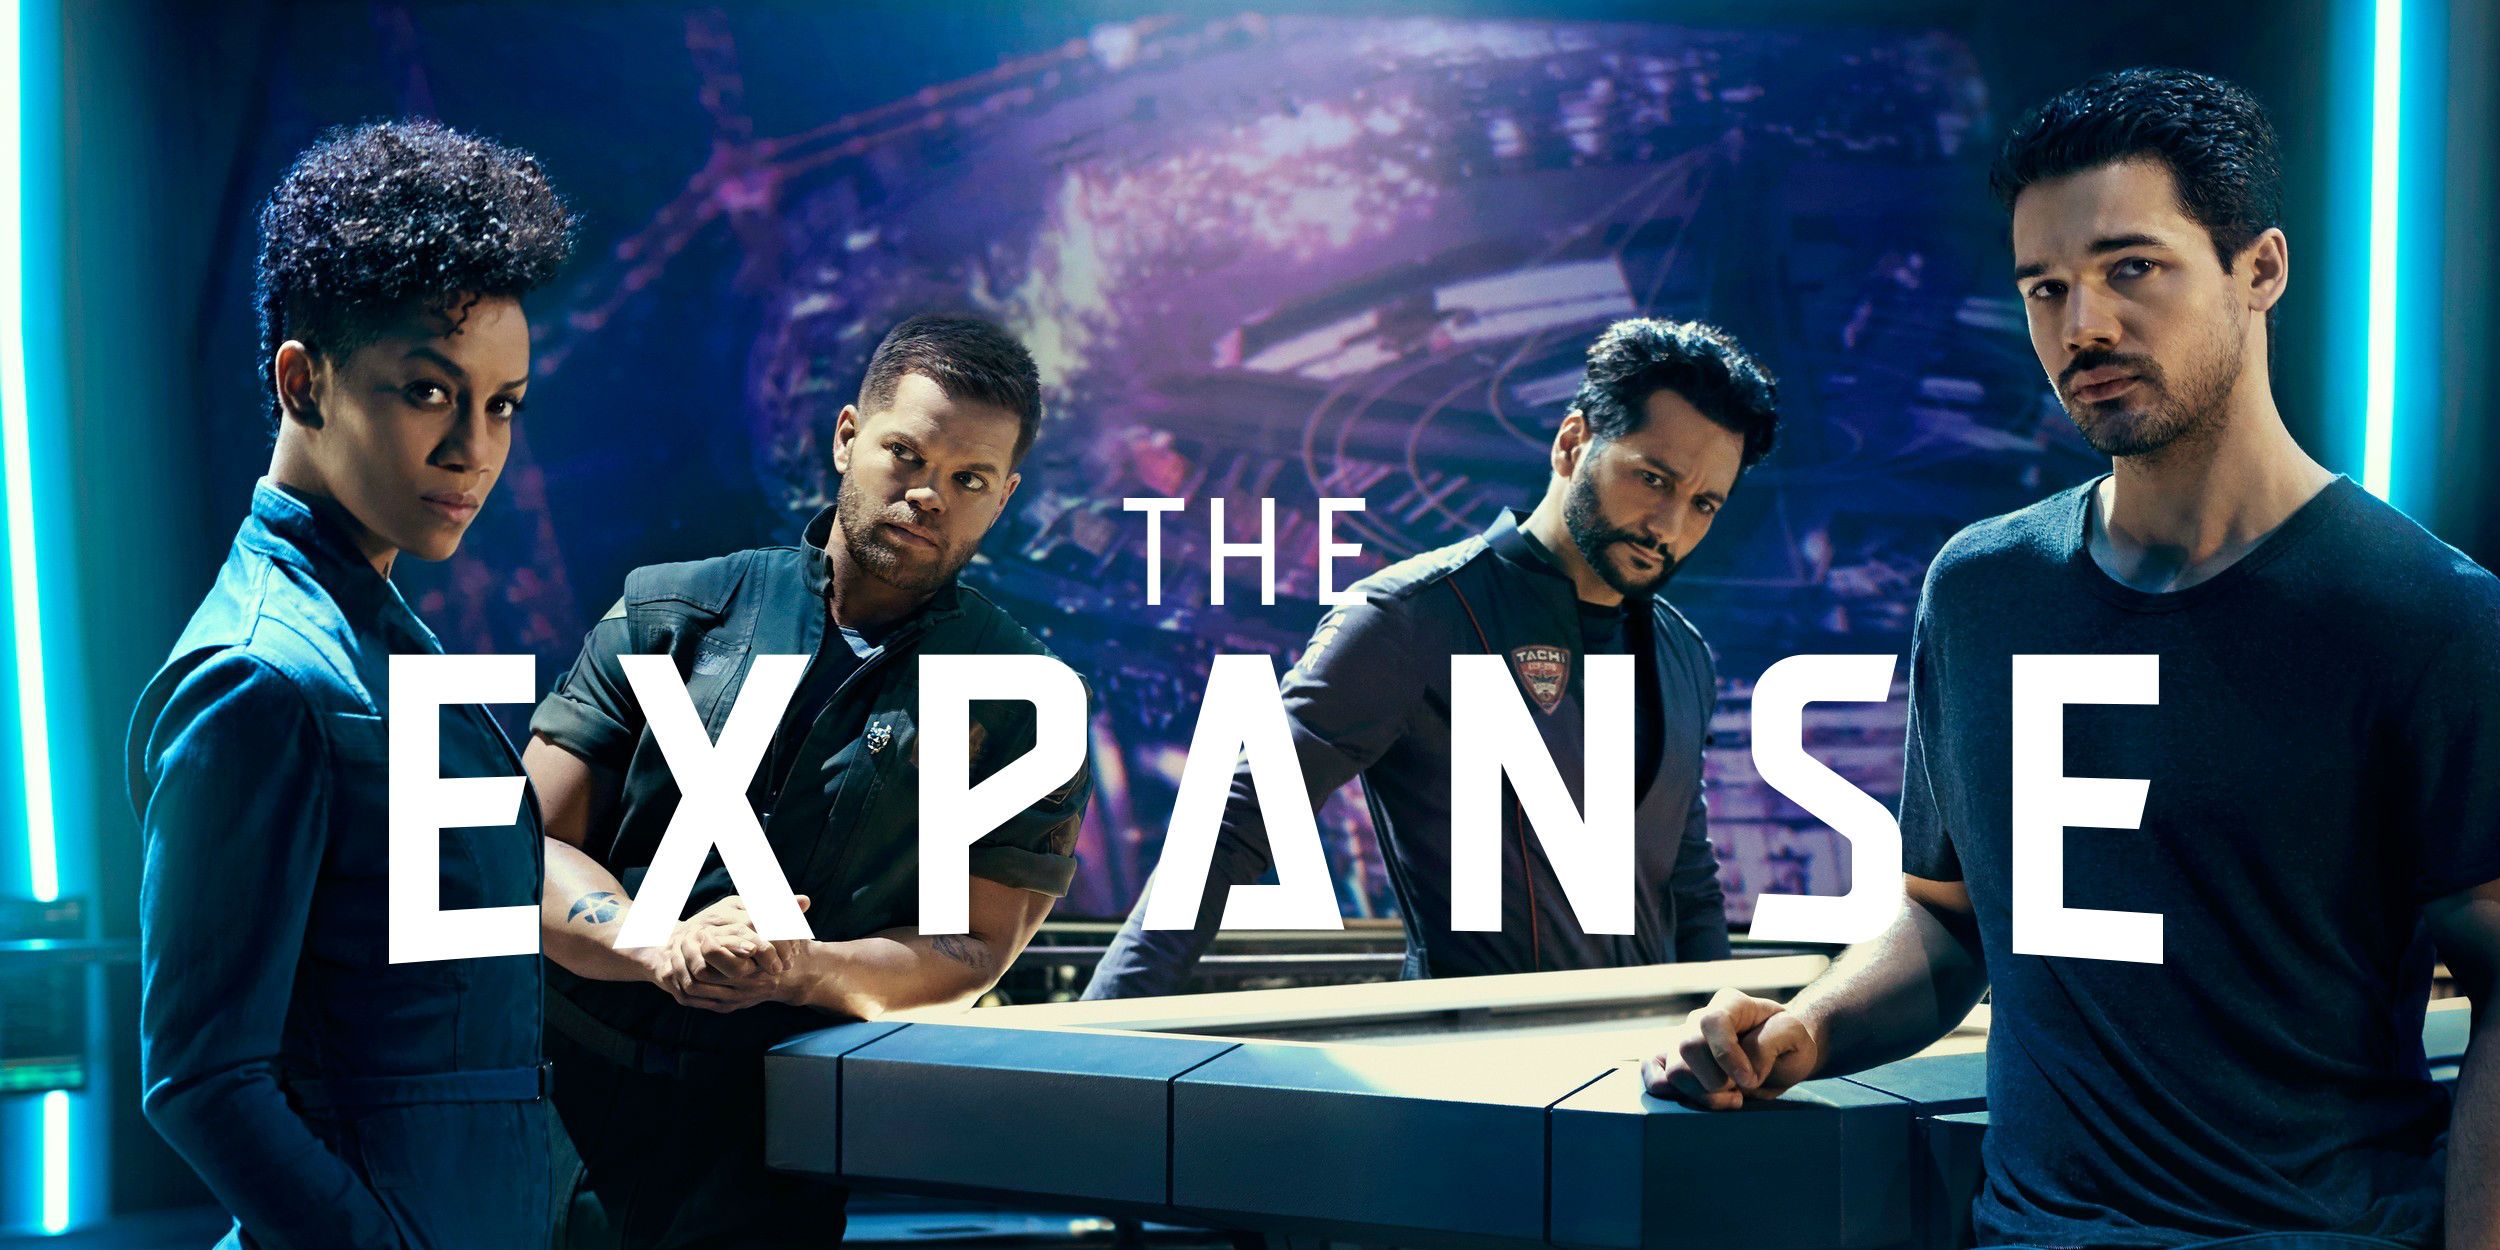 the expanse books are the complete